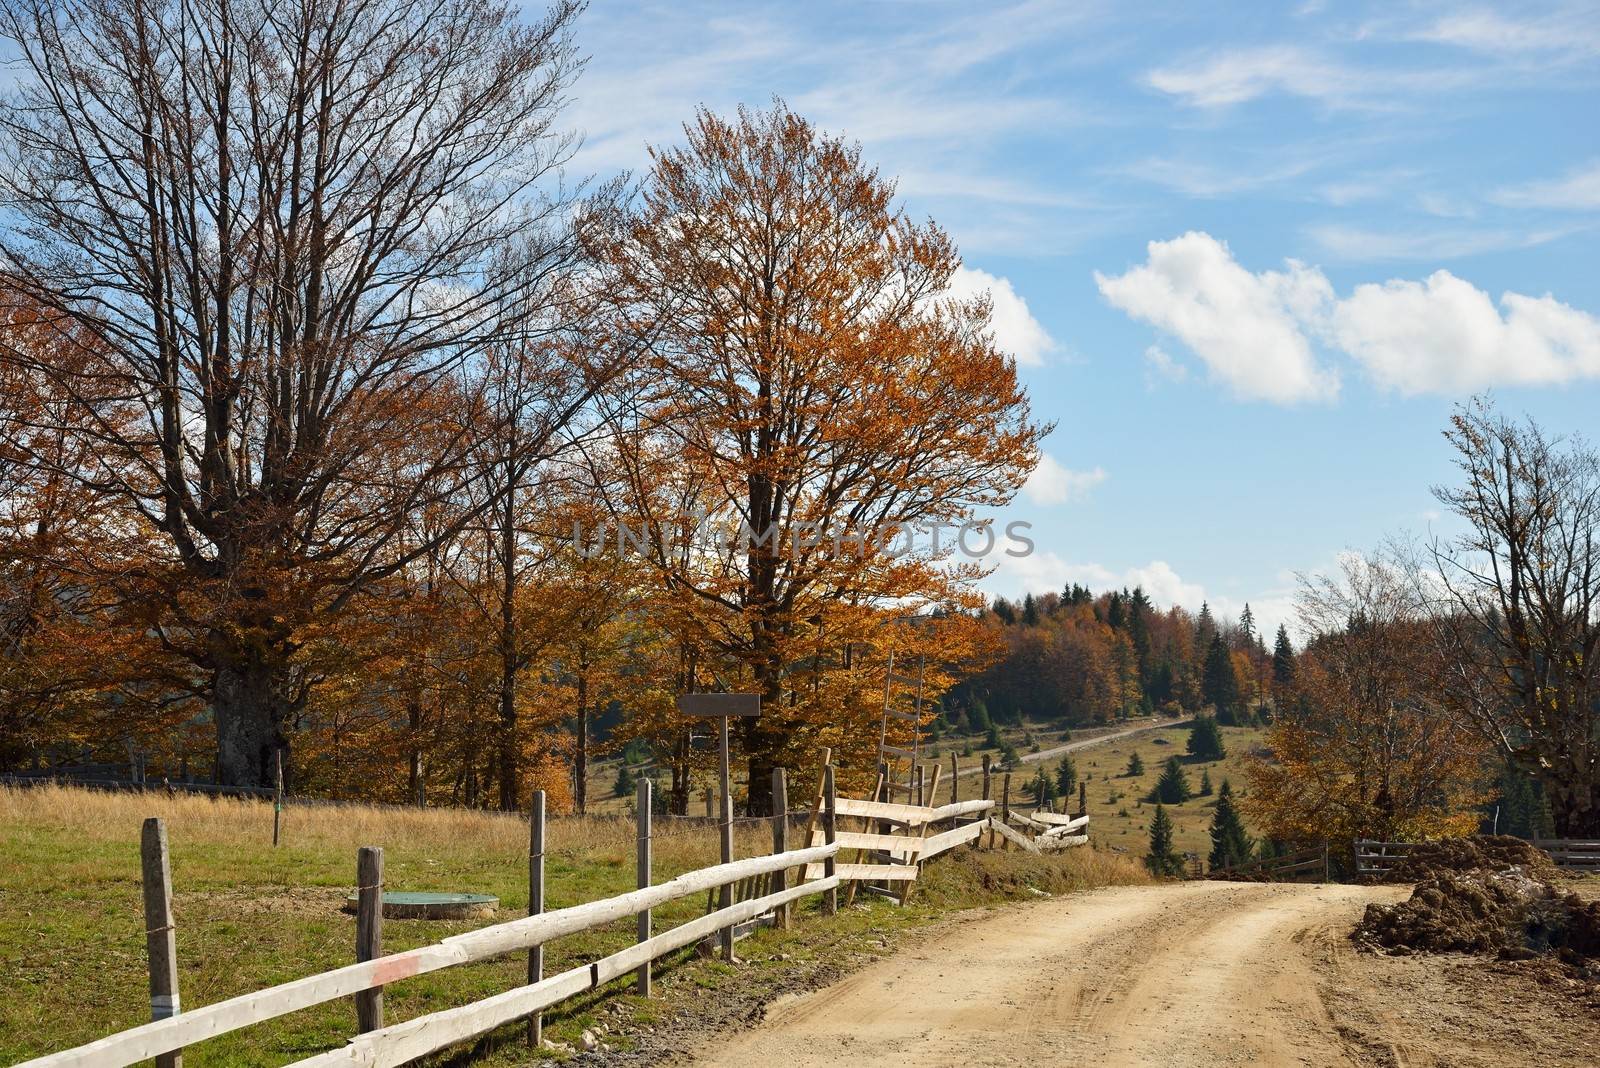 Colorful Autumn Trees with Country Road in Mountain